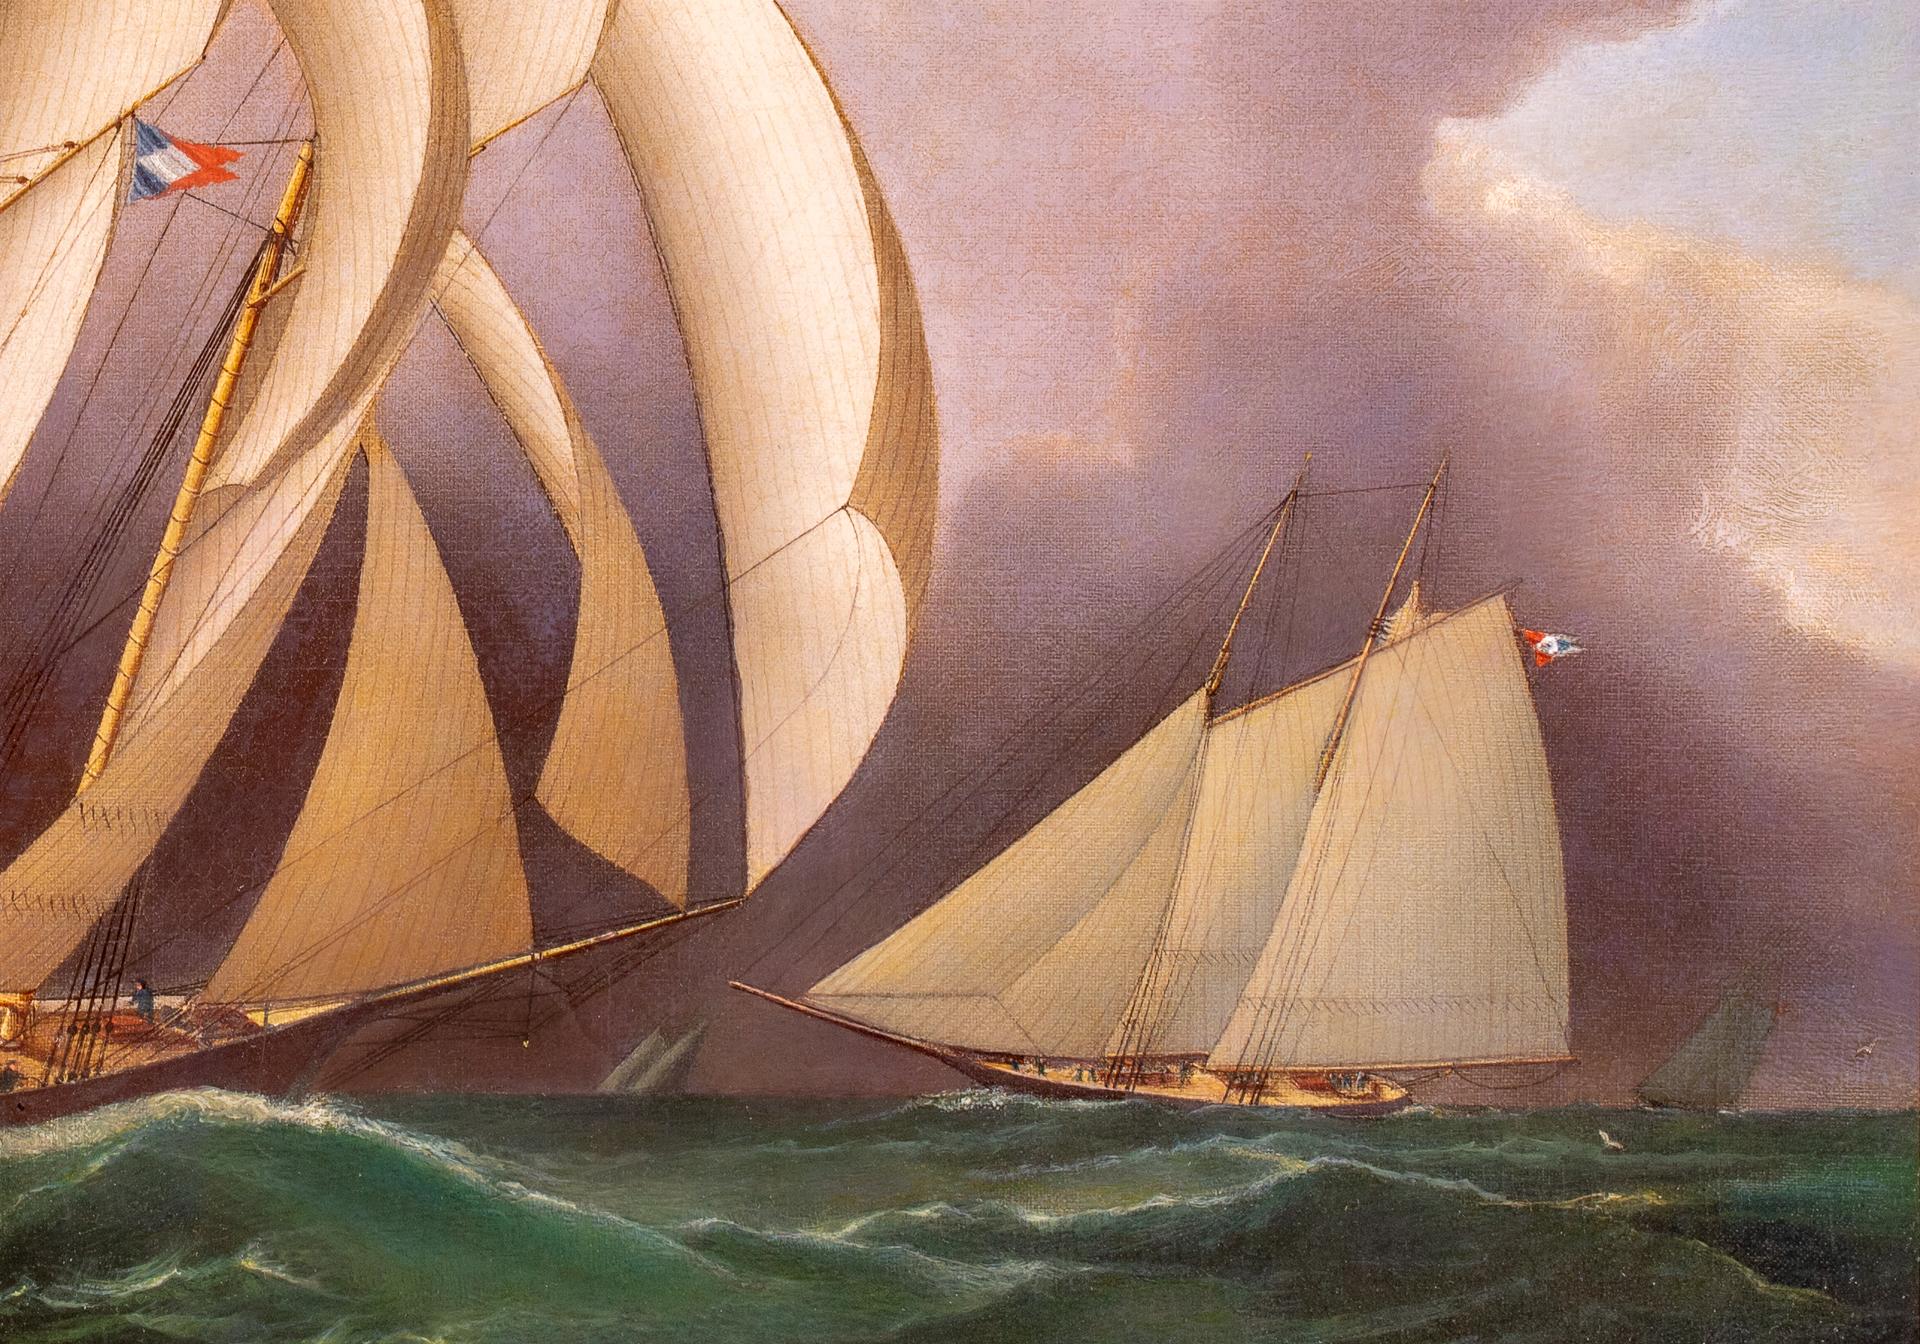 James E. Buttersworth's most sought-after artworks emerge from his depictions of American racing yachts going head to head in the major regattas and cup races of their heyday. Positioned in New York, he diligently captured pivotal matches during the